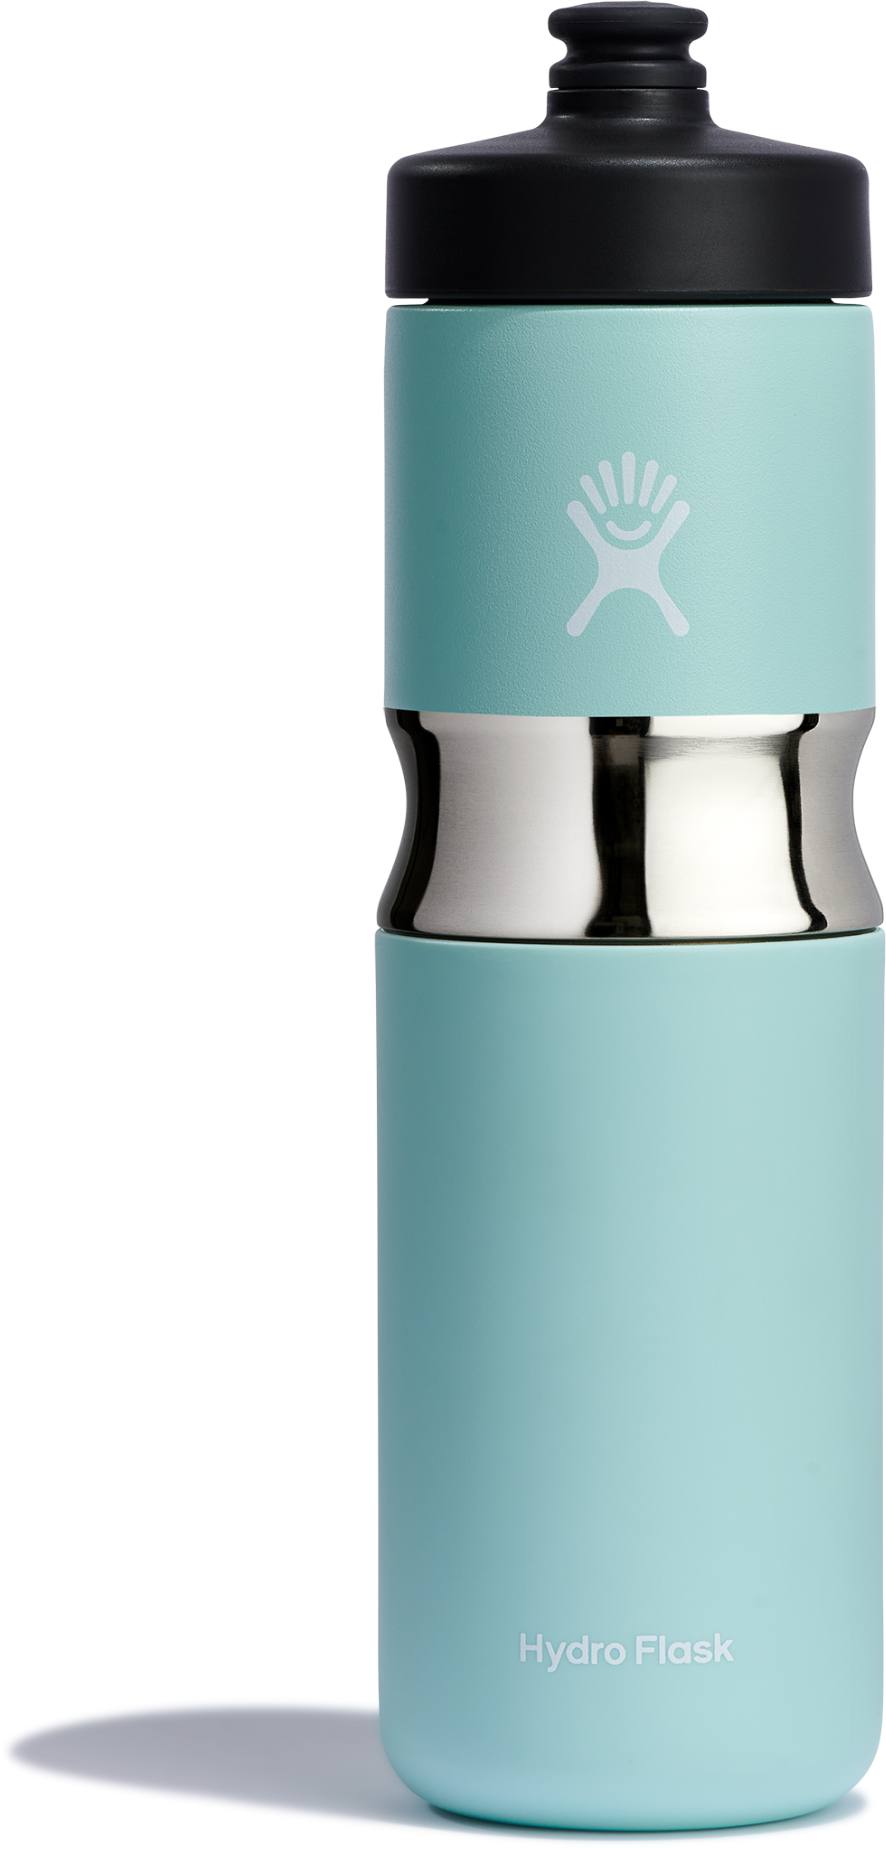 Hydro Flask 20 oz Wide Mouth Insulated Sport